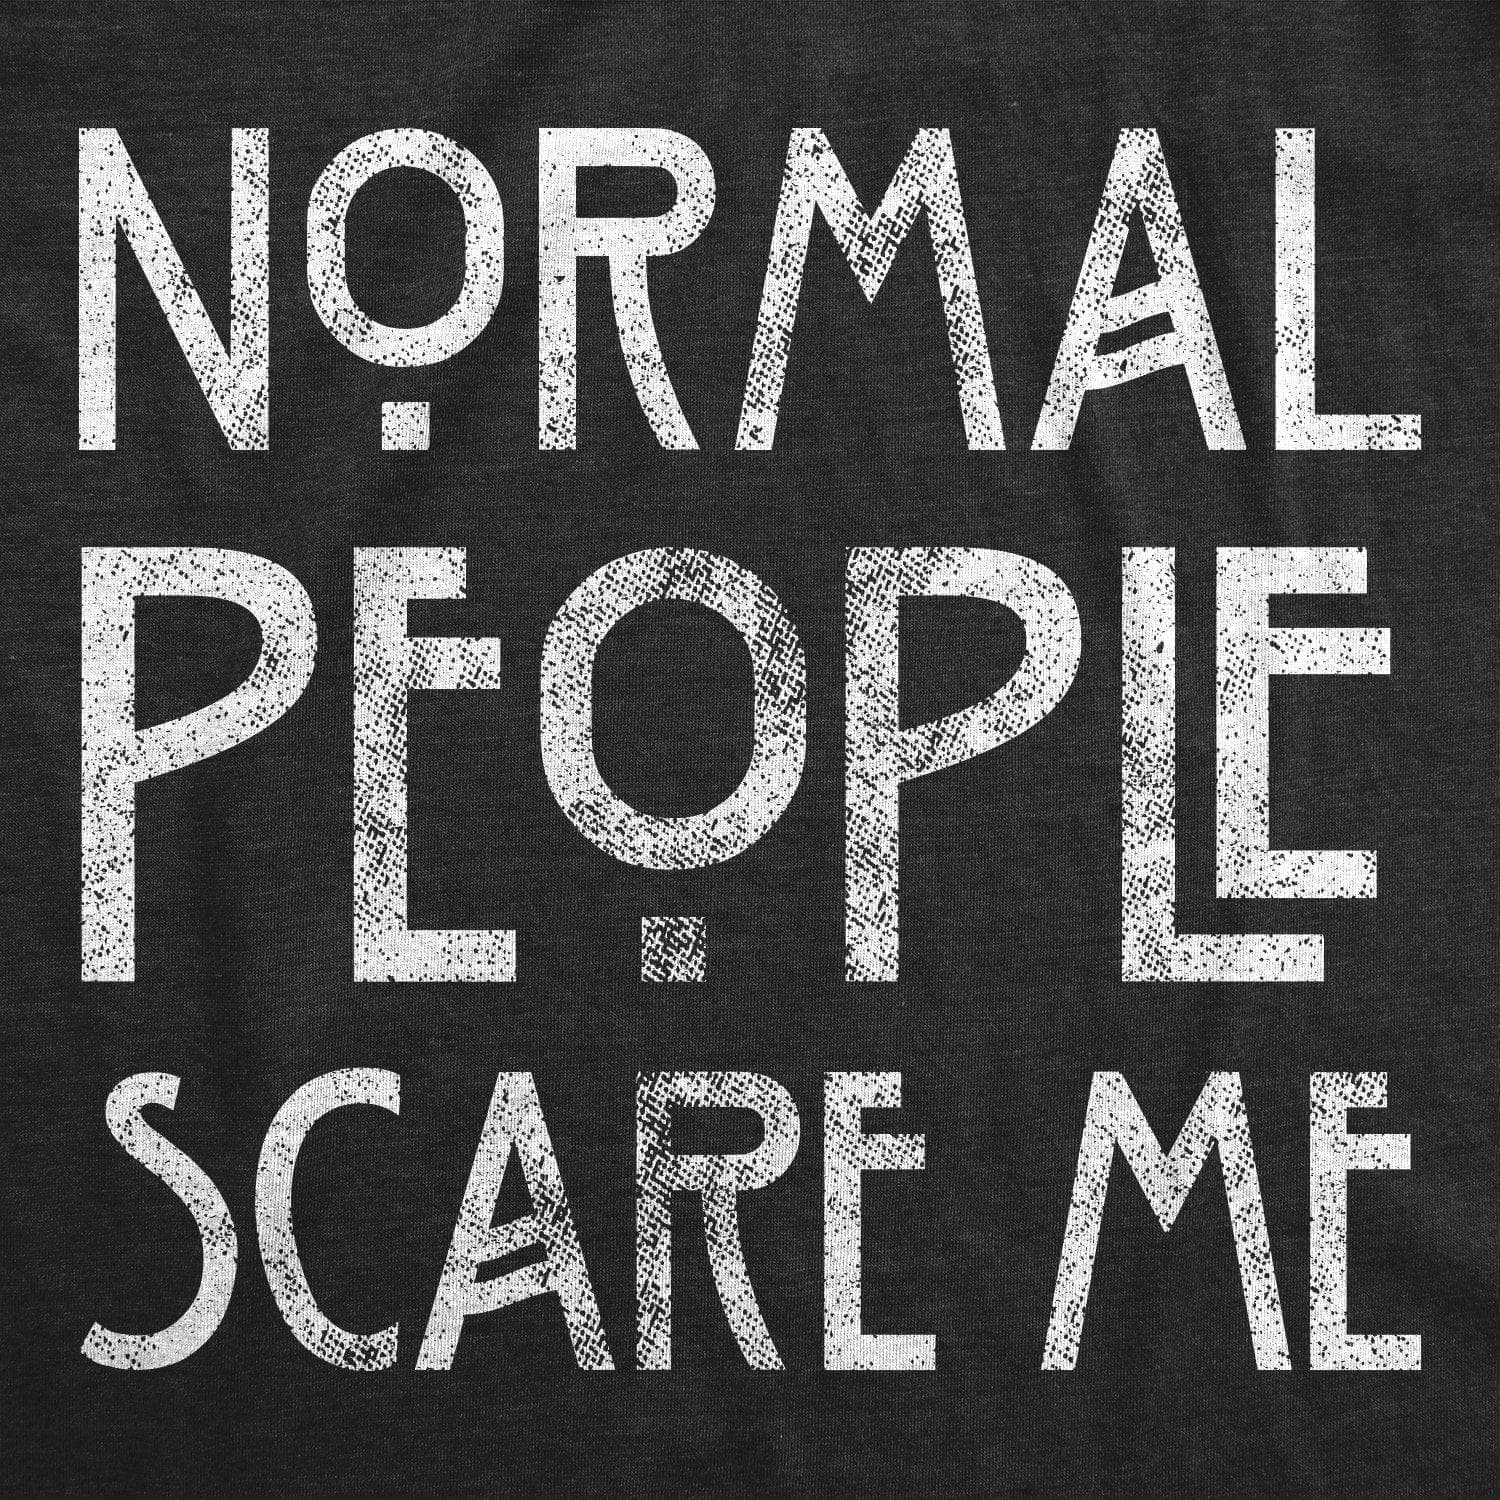 Normal People Scare Me Men's Tshirt - Crazy Dog T-Shirts